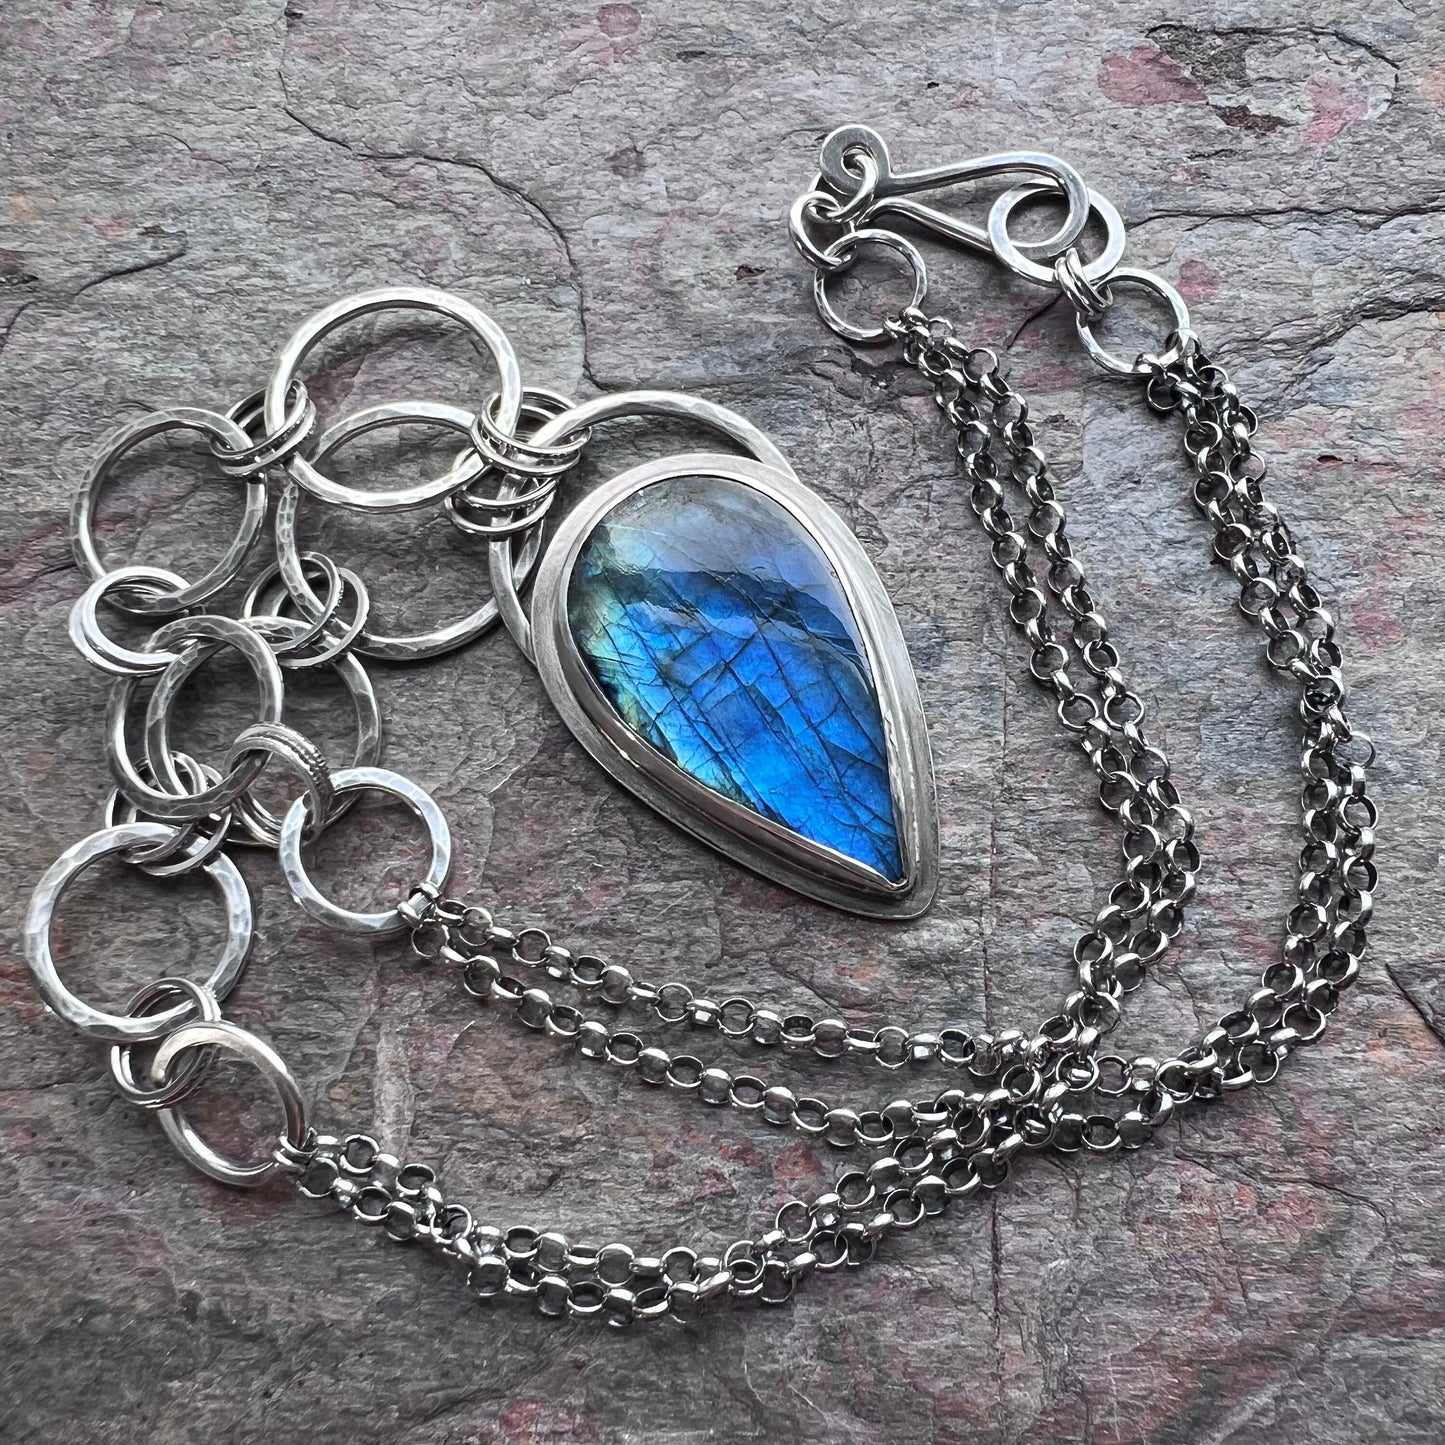 Labradorite Sterling Silver Necklace - Handmade One-of-a-kind Pendant on Hammered Ring Chain